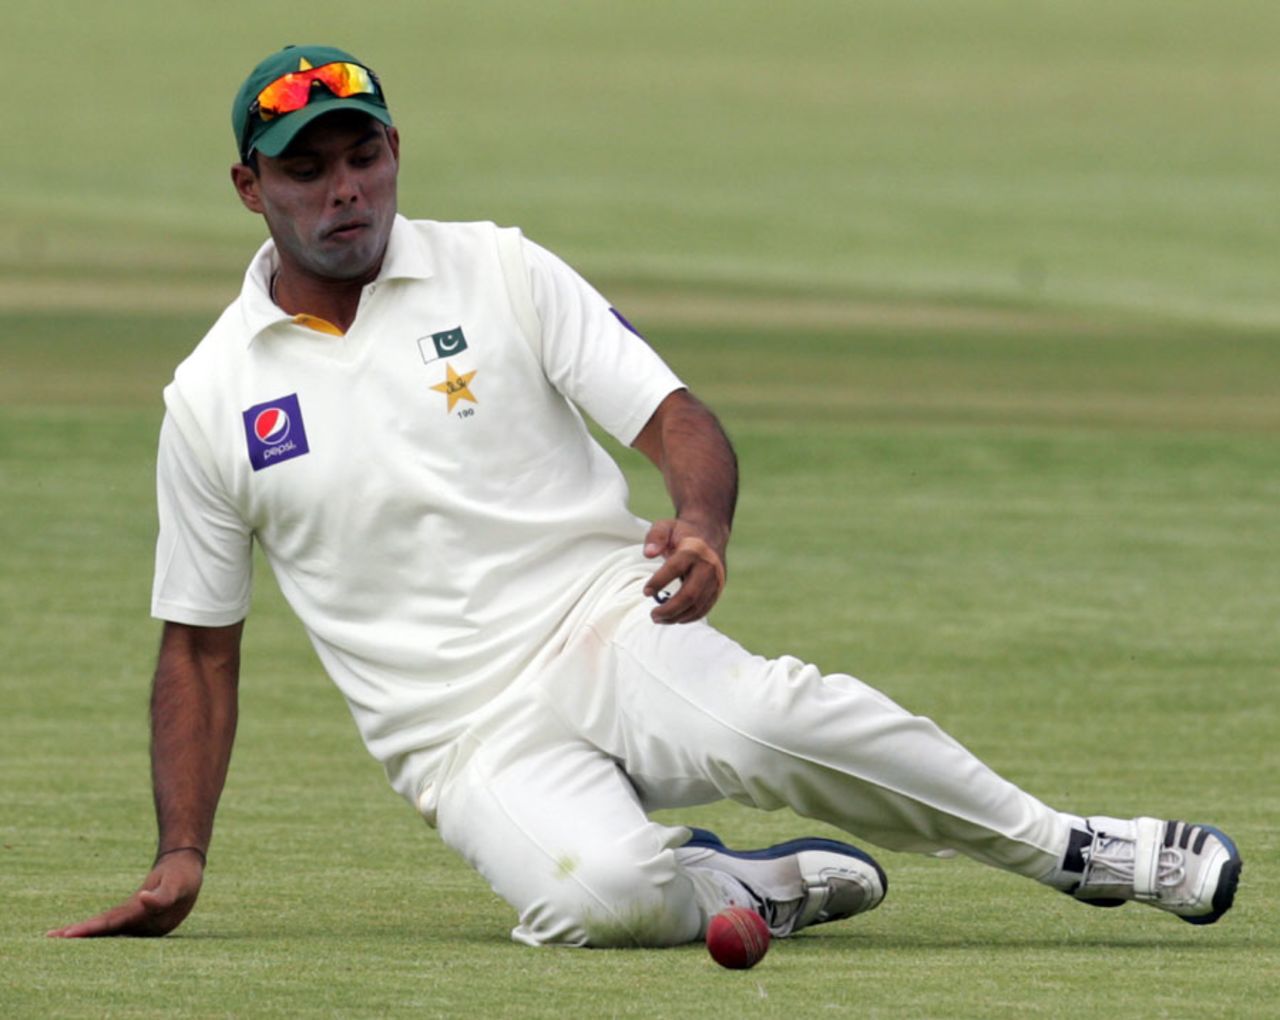 Khurram Manzoor makes a diving stop in the field, Zimbabwe v Pakistan, 1st Test, Harare, 2nd day, September 4, 2013